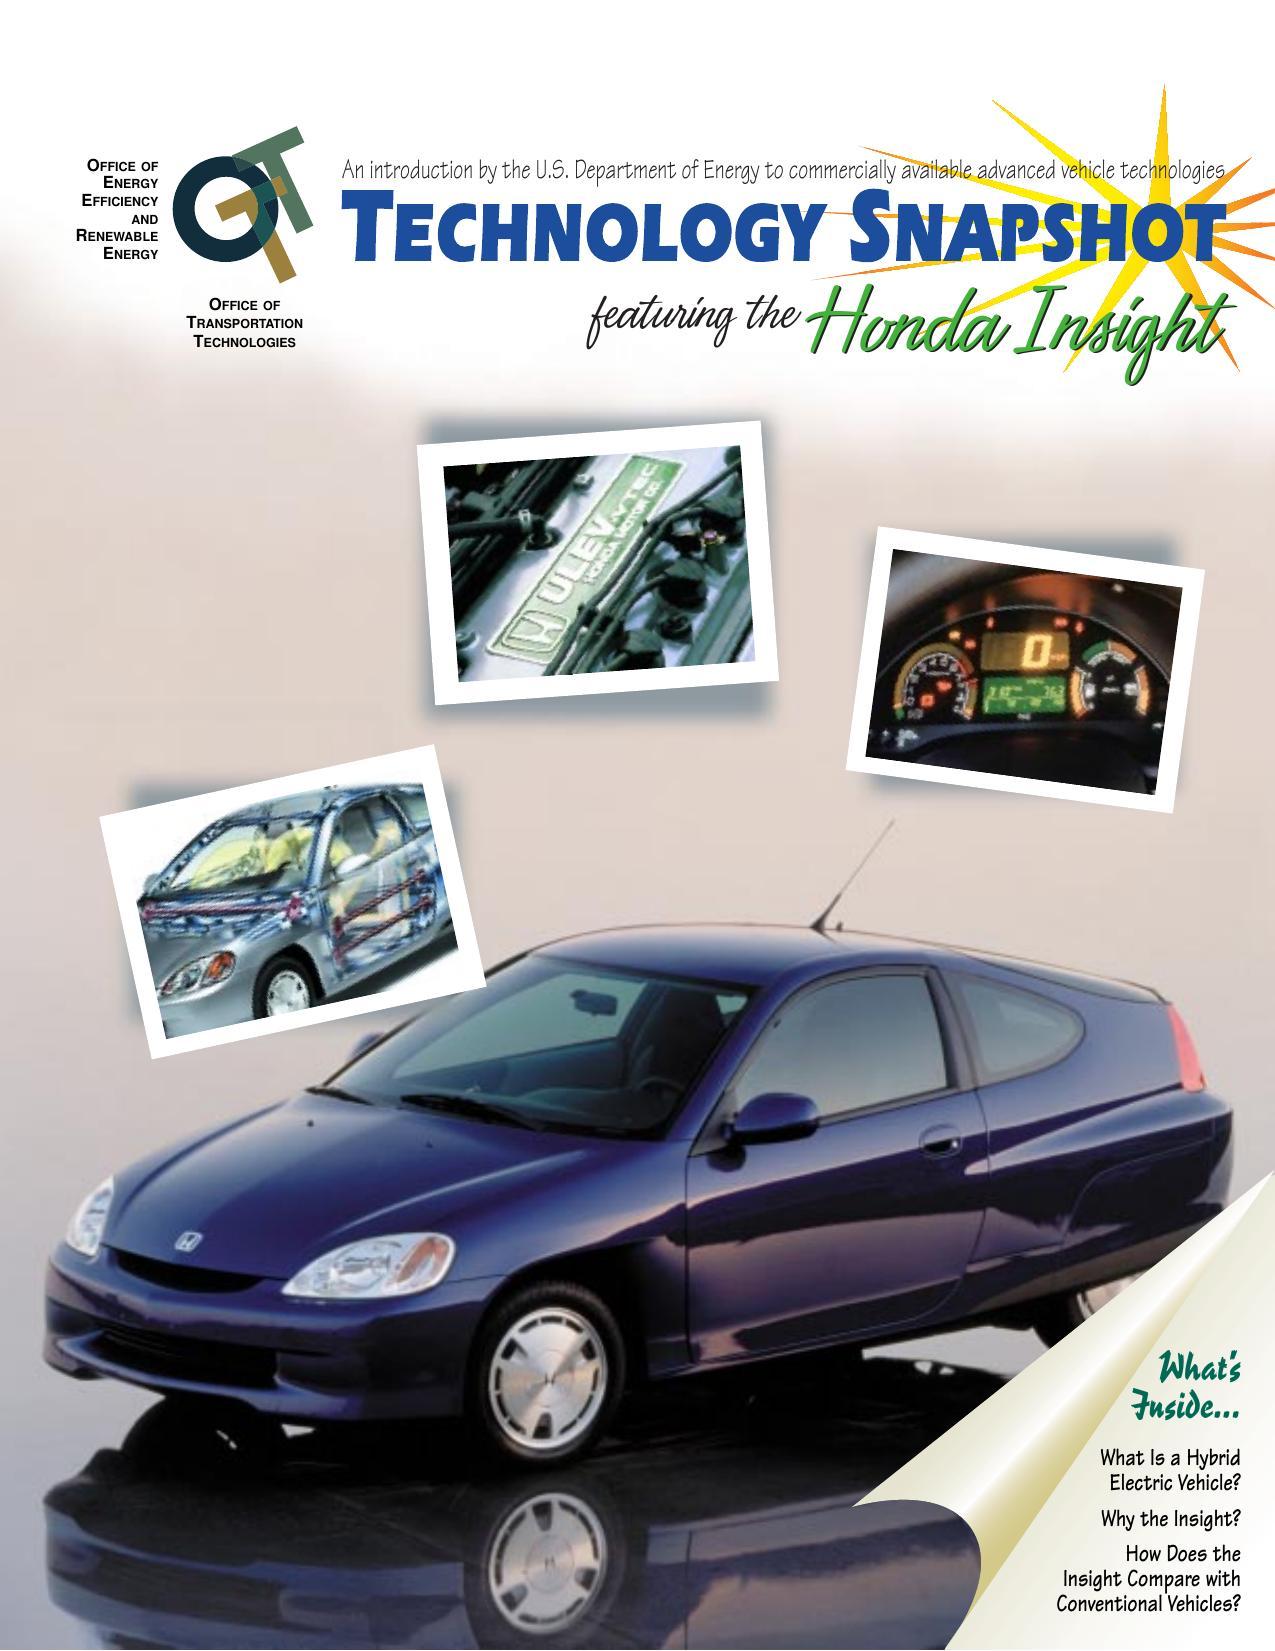 us-department-of-energy-technology-snapshot-featuring-the-honda-insight.pdf